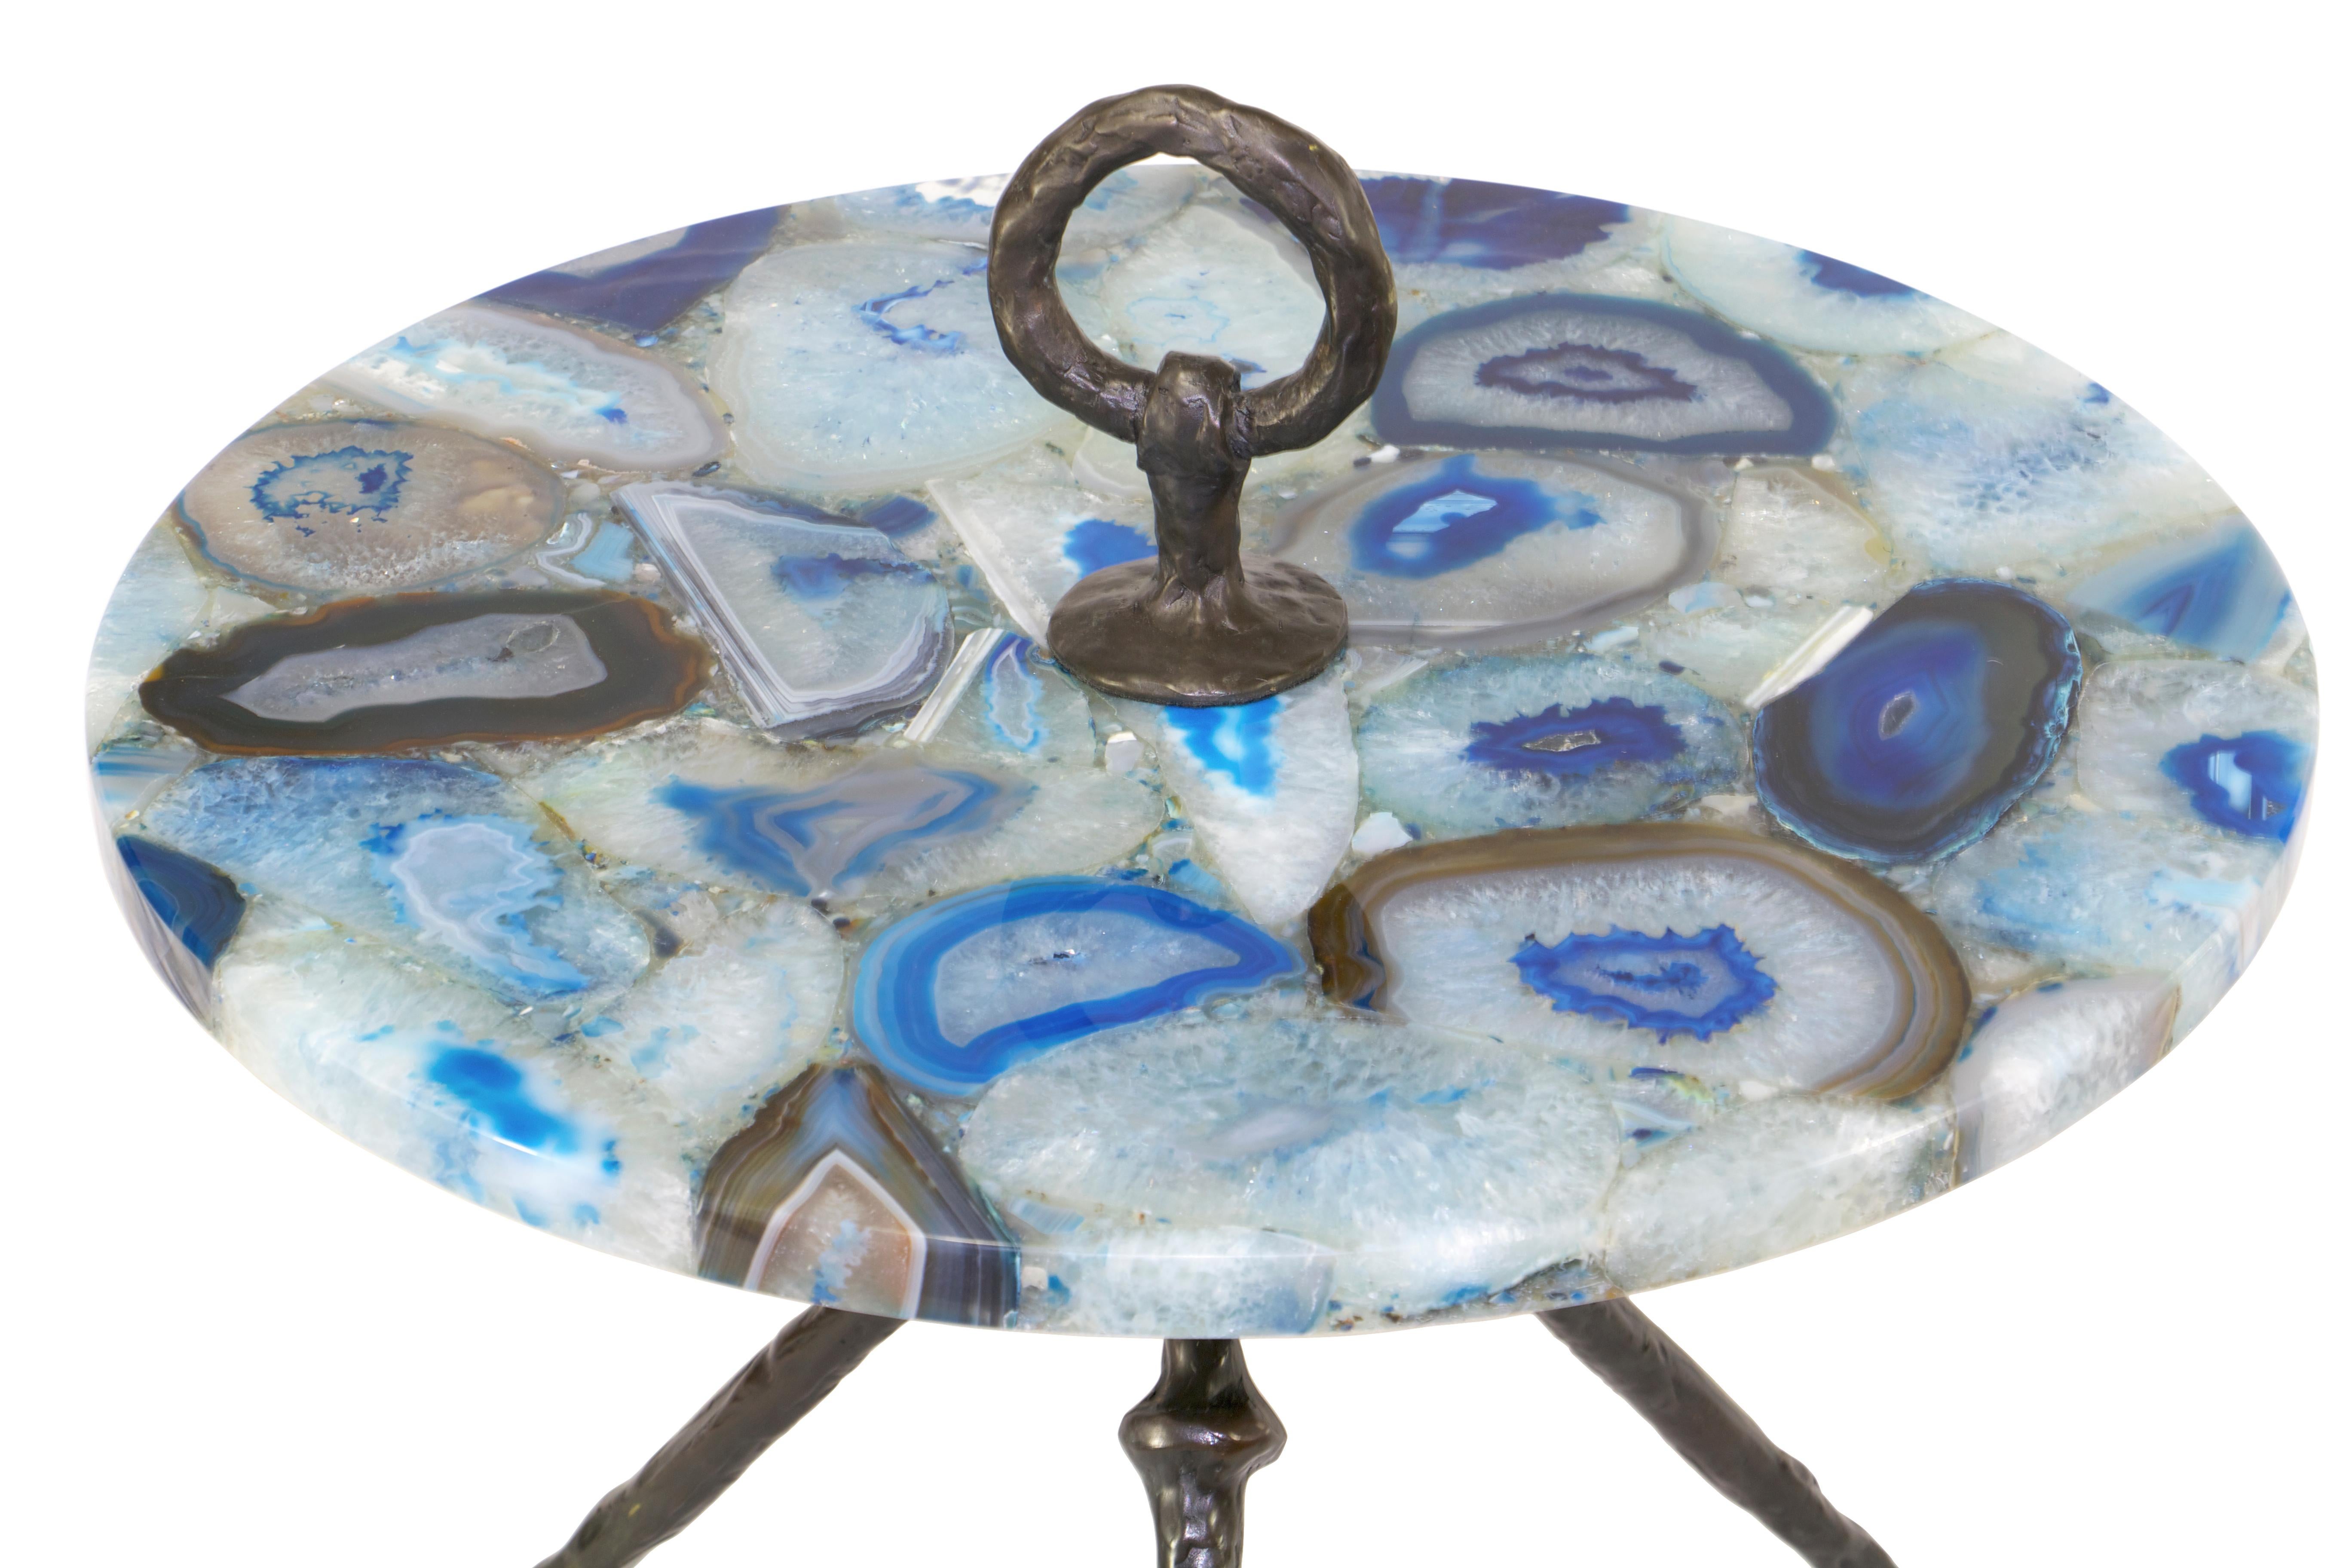 A hand-sculpted and forged bronze tripod cocktail table with a circular stone top, it is fastened with a solid bronze handle on top. Custom sizes, finishes and tops available.